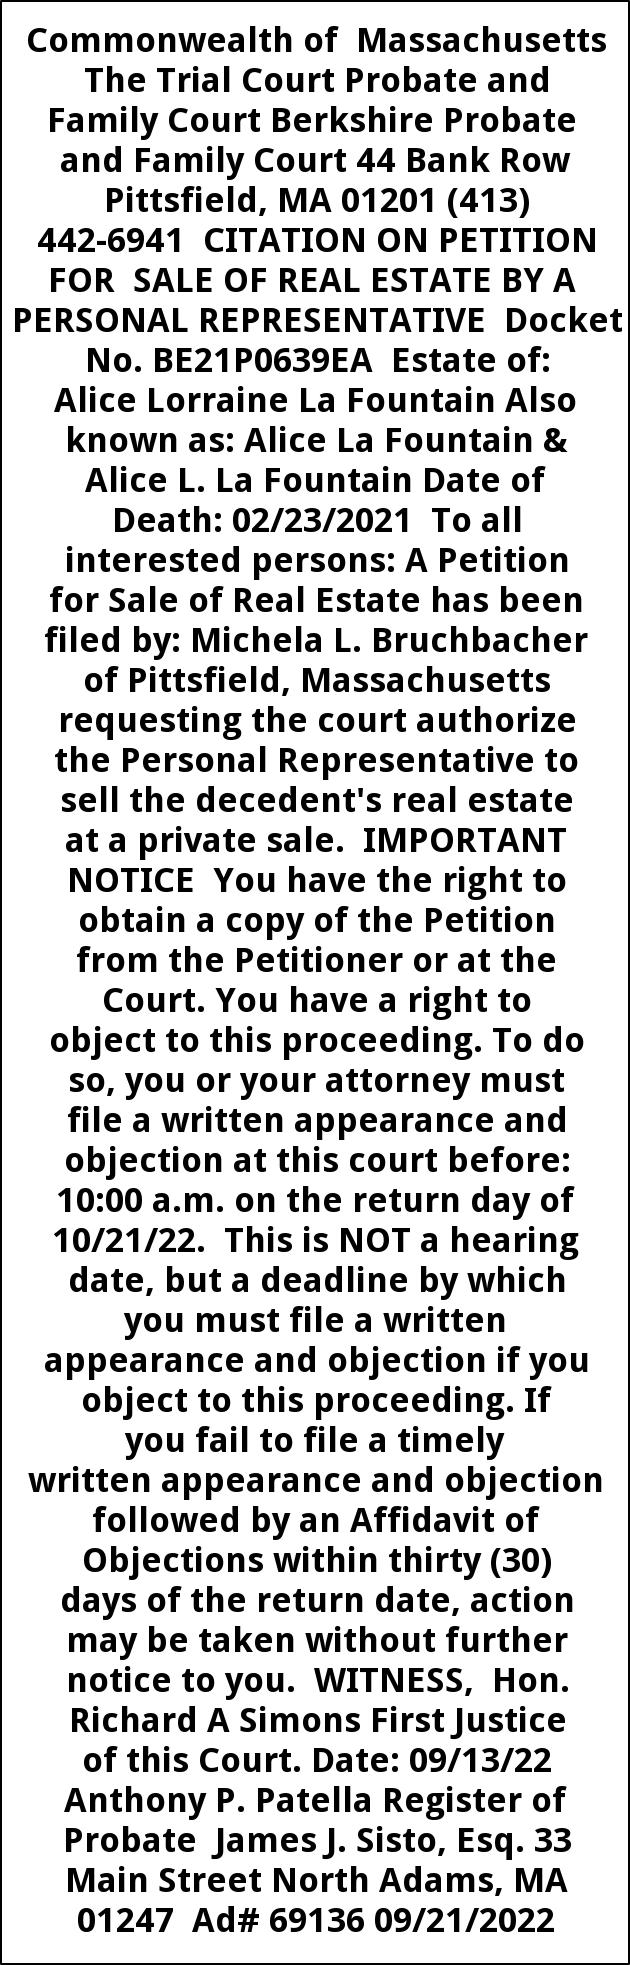 Citation On Petition For Sale Of Real Estate 